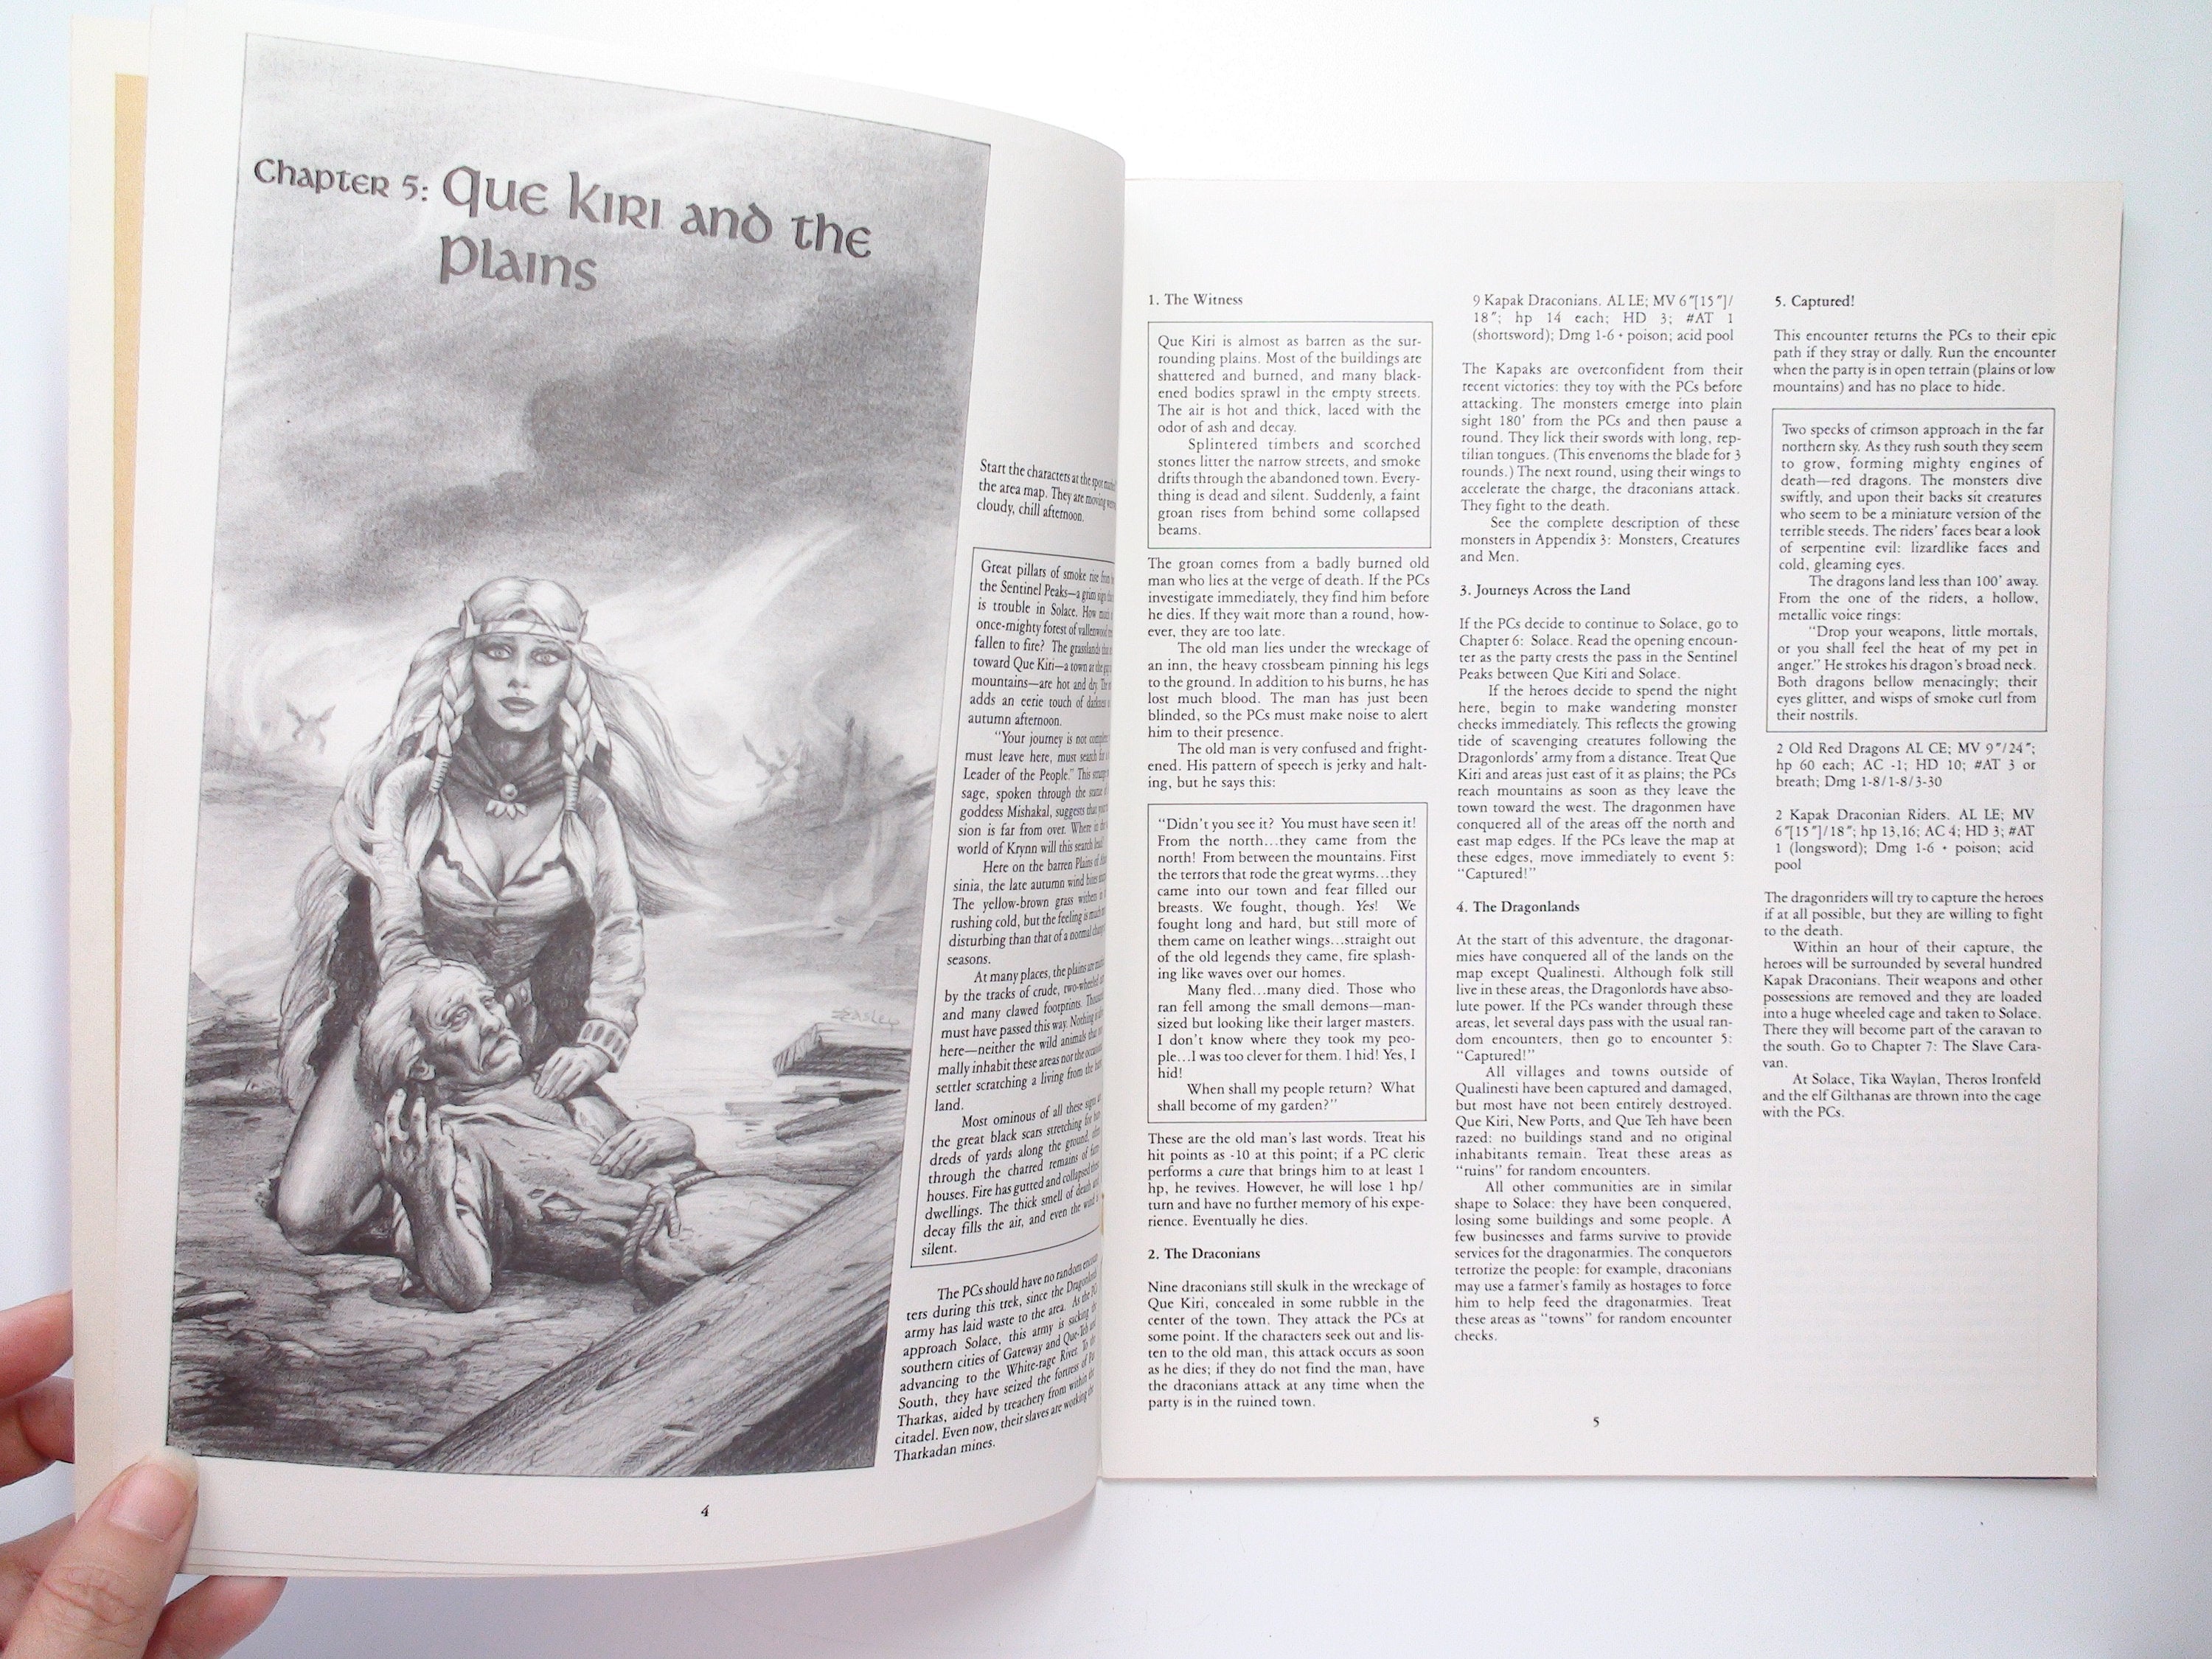 Dragons of Flame by Douglas Niles, TSR, AD&D Adventure Module DL2 9132, 1984